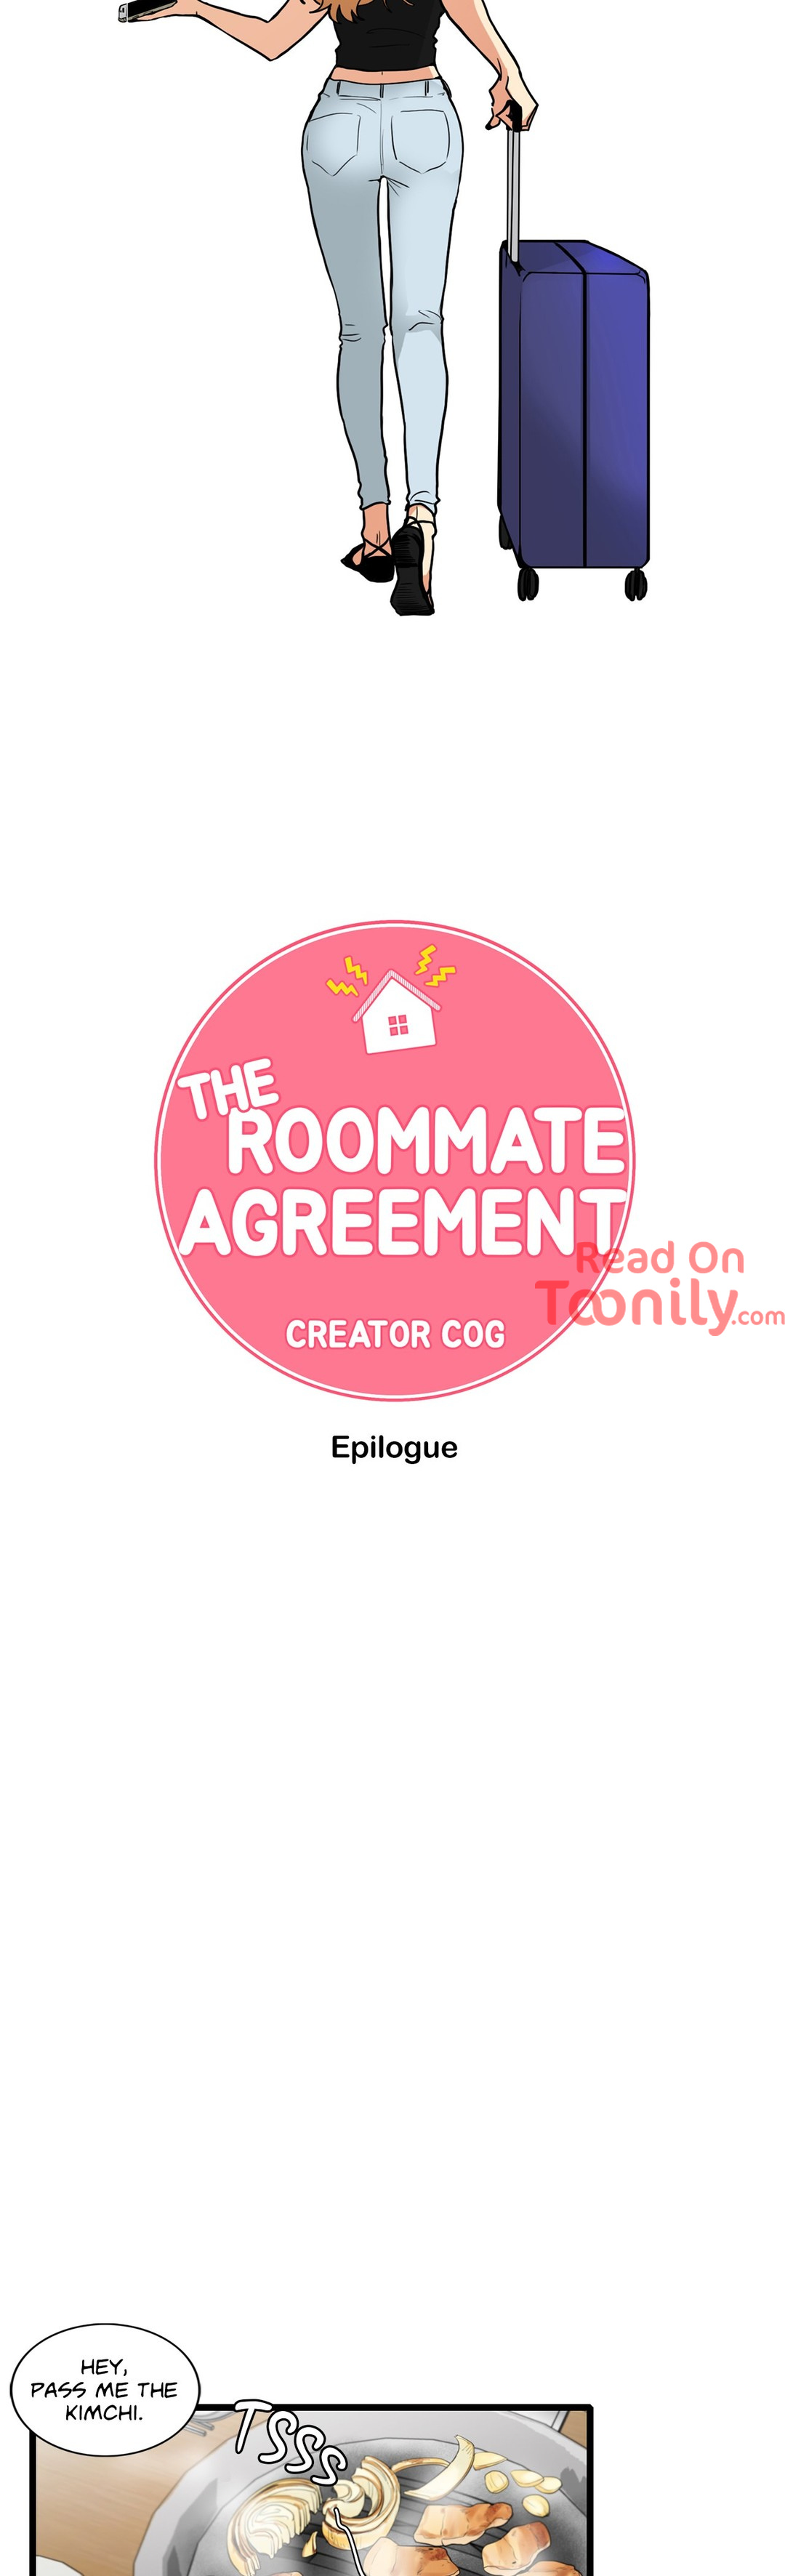 The Roommate Agreement image